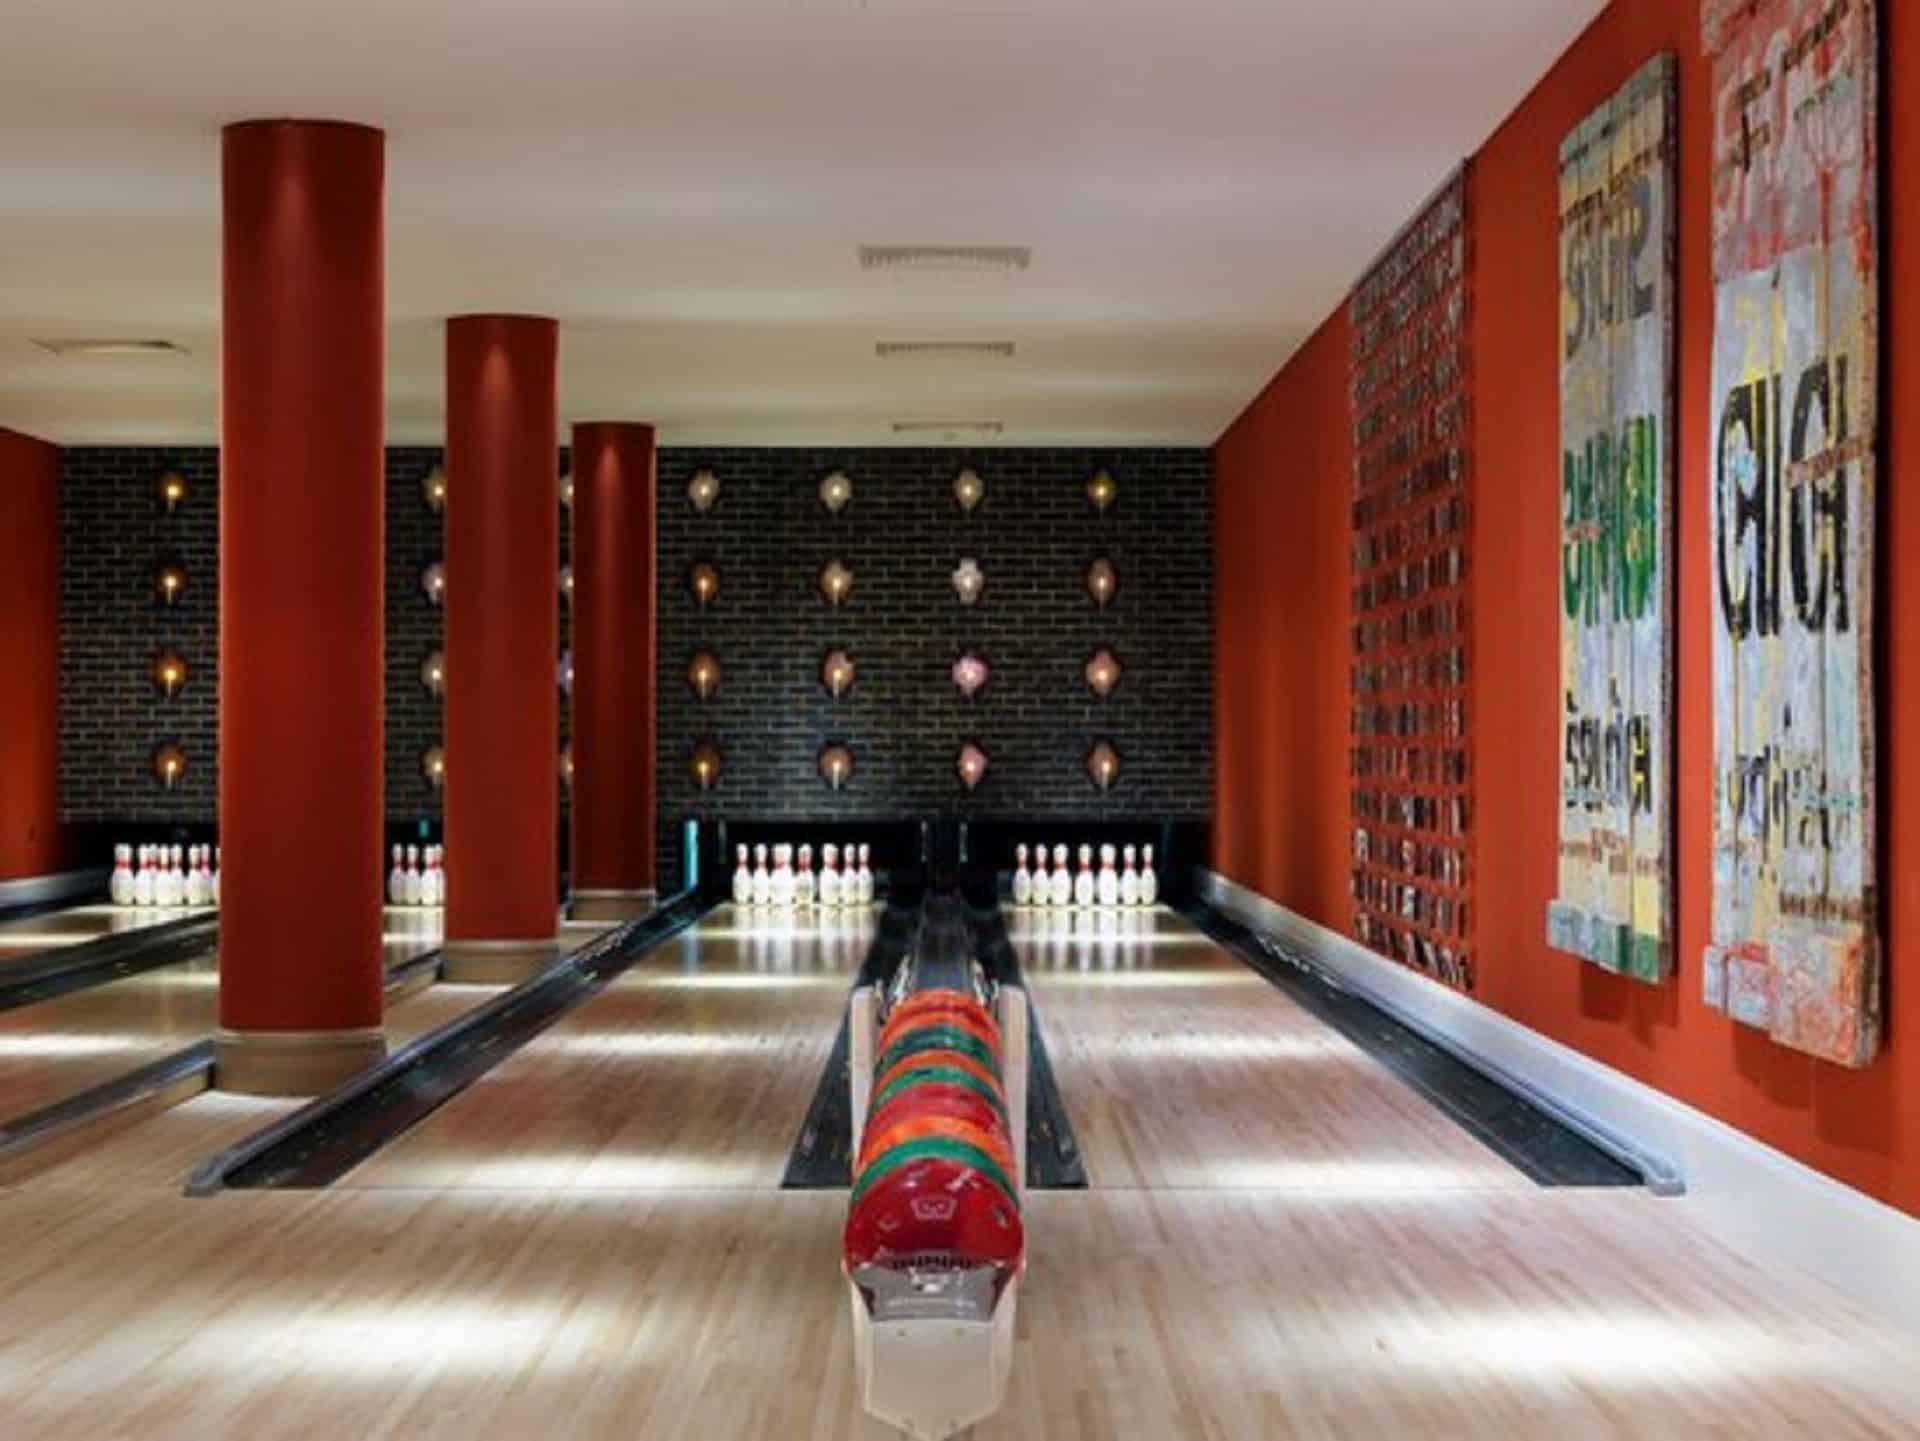 The Croc Bowling Alley in UK